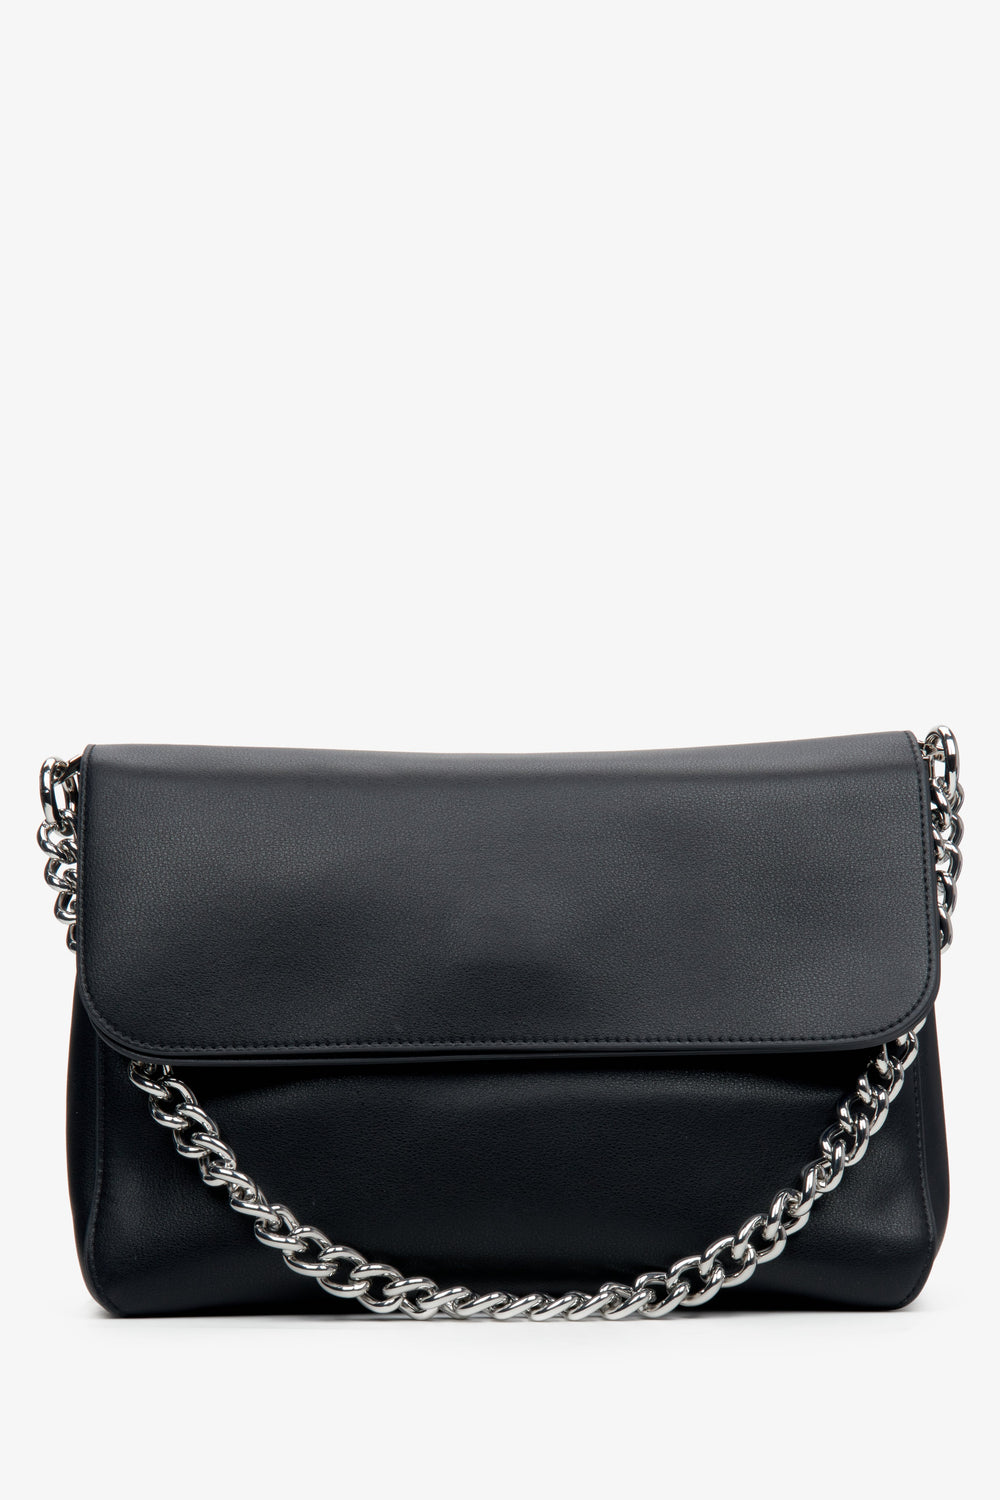 Women's Black Crossbody Bag with Chain made of Genuine Leather Estro ER00113761.